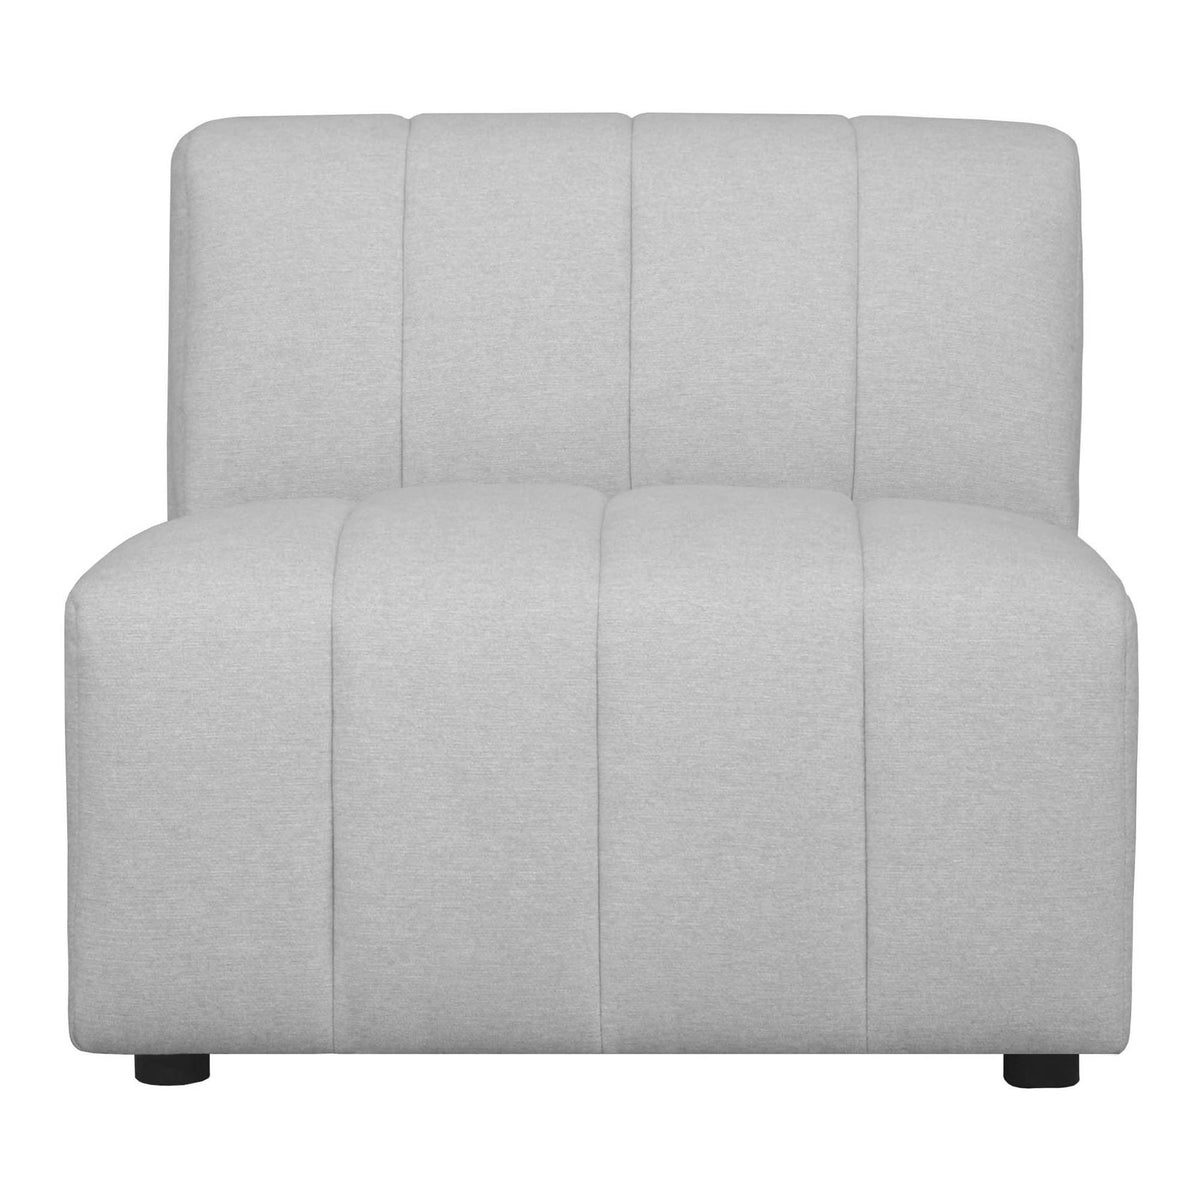 Moe's Home Collection Lyric Slipper Chair Oatmeal - MT-1024-34